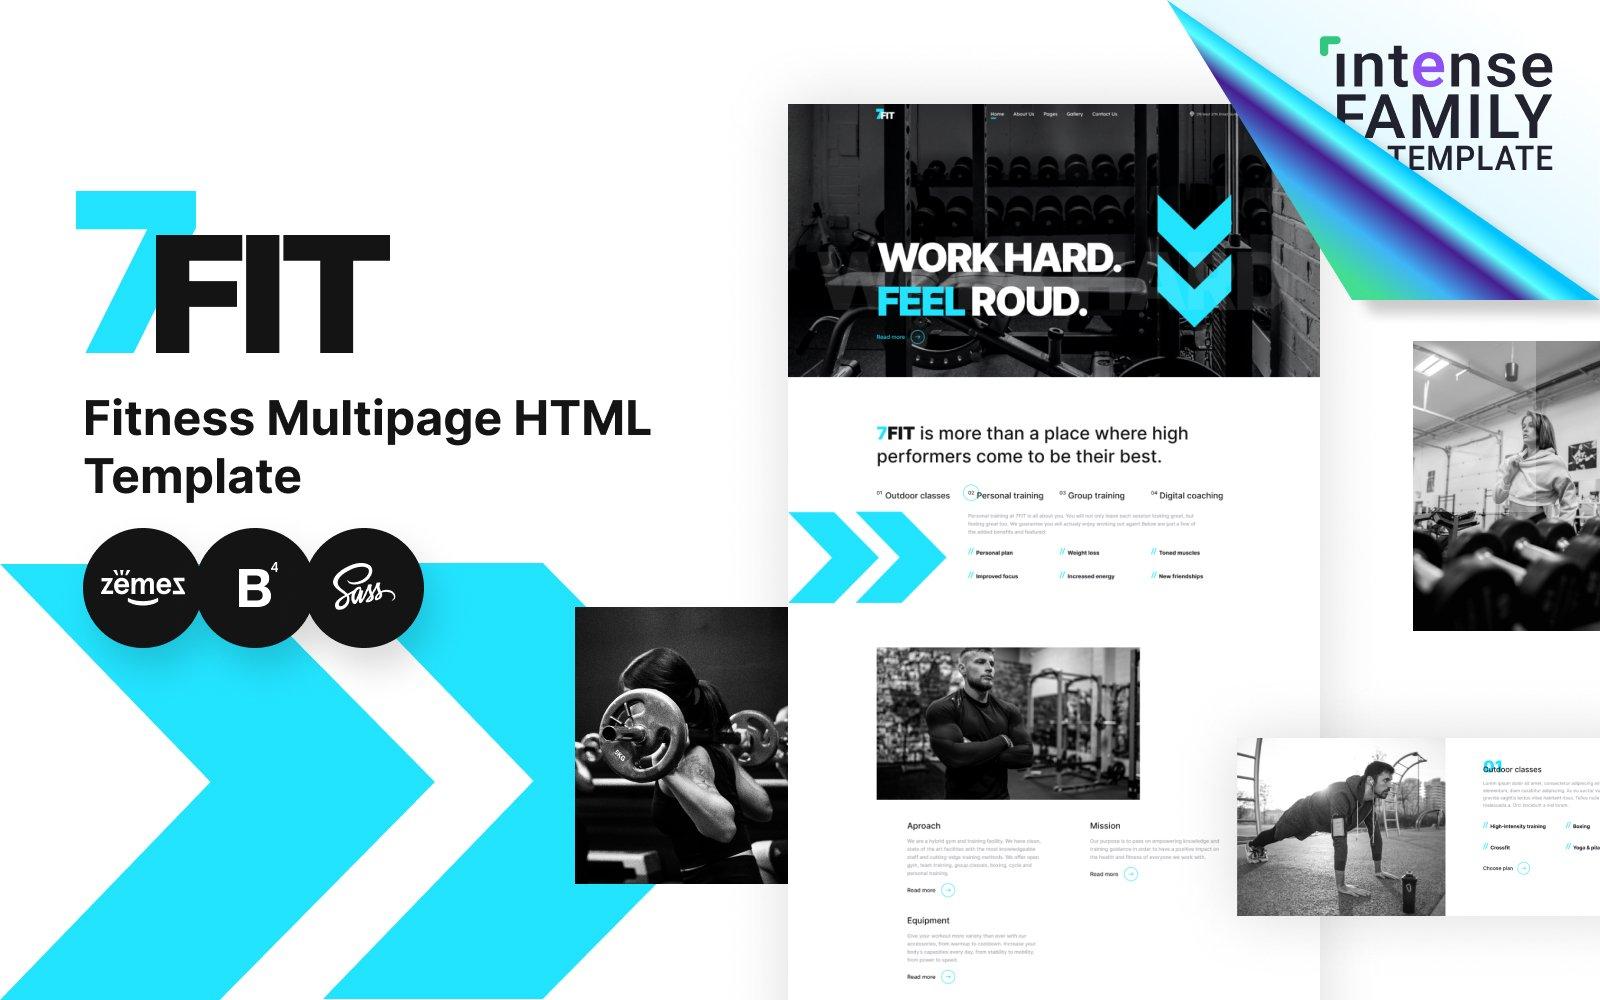 7Fit - Gym HTML5 Responsive Website Template